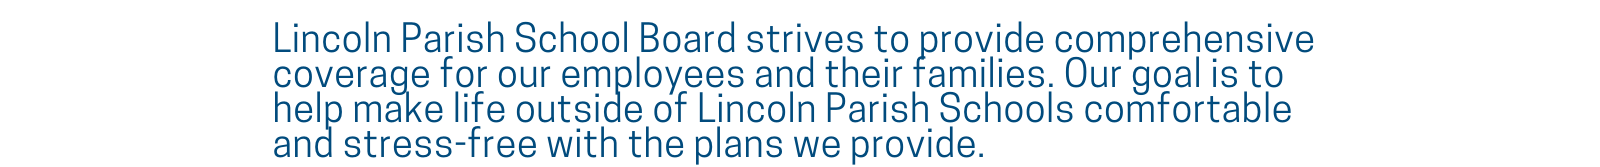 Lincoln Parish School Board strives to provide comprehensive coverage for our employees and their families. Our goal is to help make life outside of Lincoln Parish Schools comfortable and stress-free with the plans we provide.